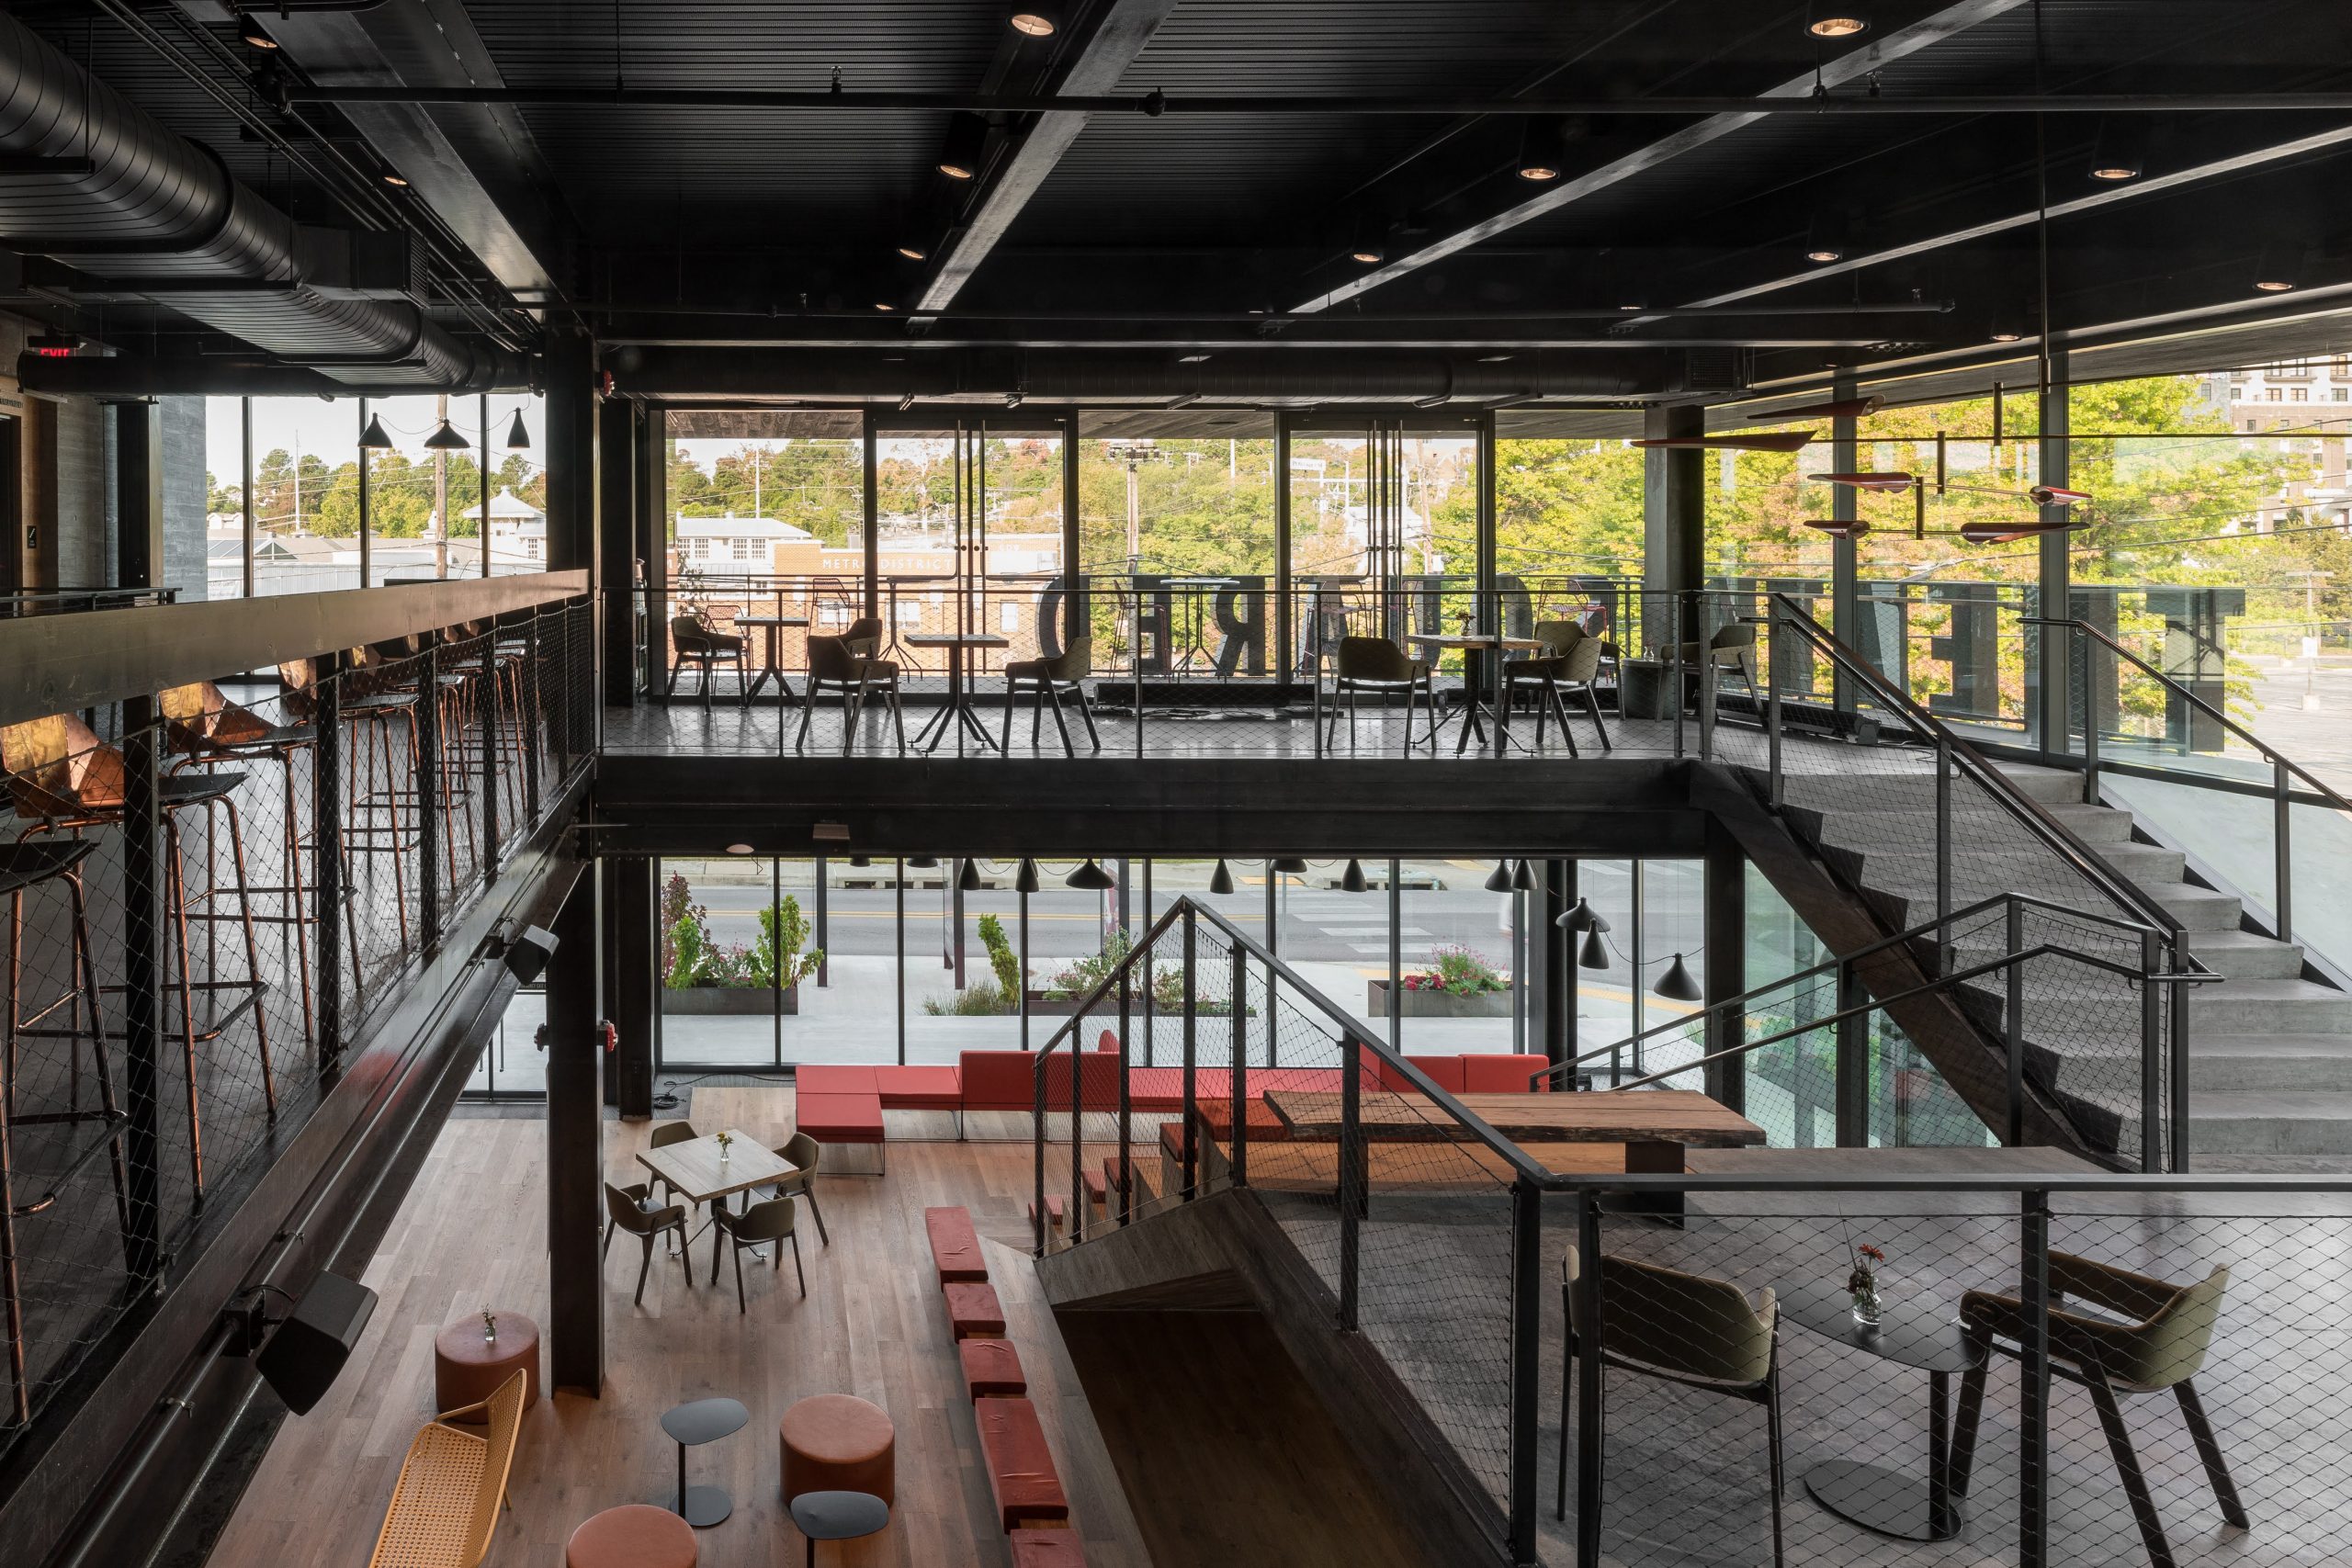 Inside the modern interior on the second floor are areas surrounded by lavish furnishings of Theatre Squared professional theatre in Fayetteville, Arkansas featuring Kebony Clear Cladding with a Shou Sugi Ban Half Gator Finish